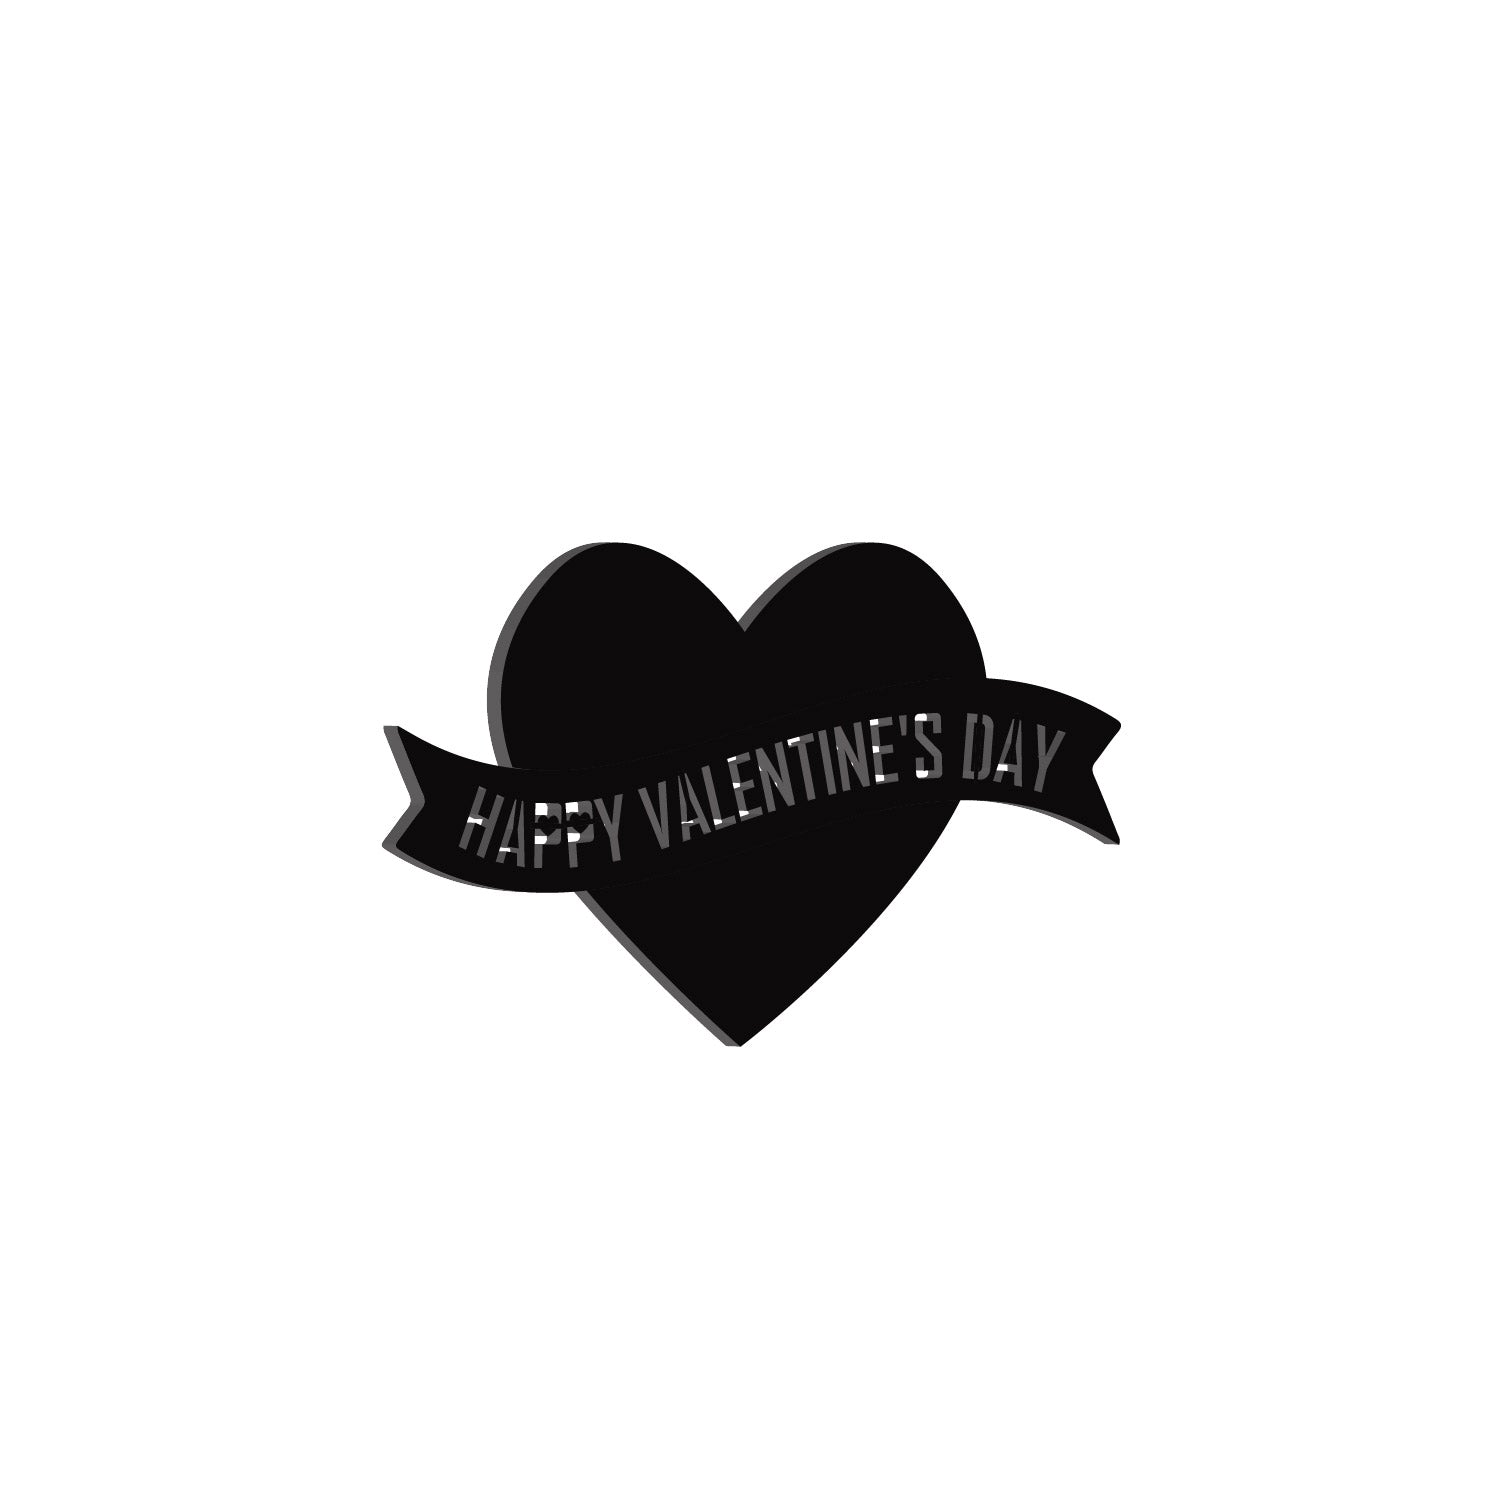 "Happy Valentine's Day" Black Engineered Wood Wall Art Cutout, Ready to Hang Home Decor 4